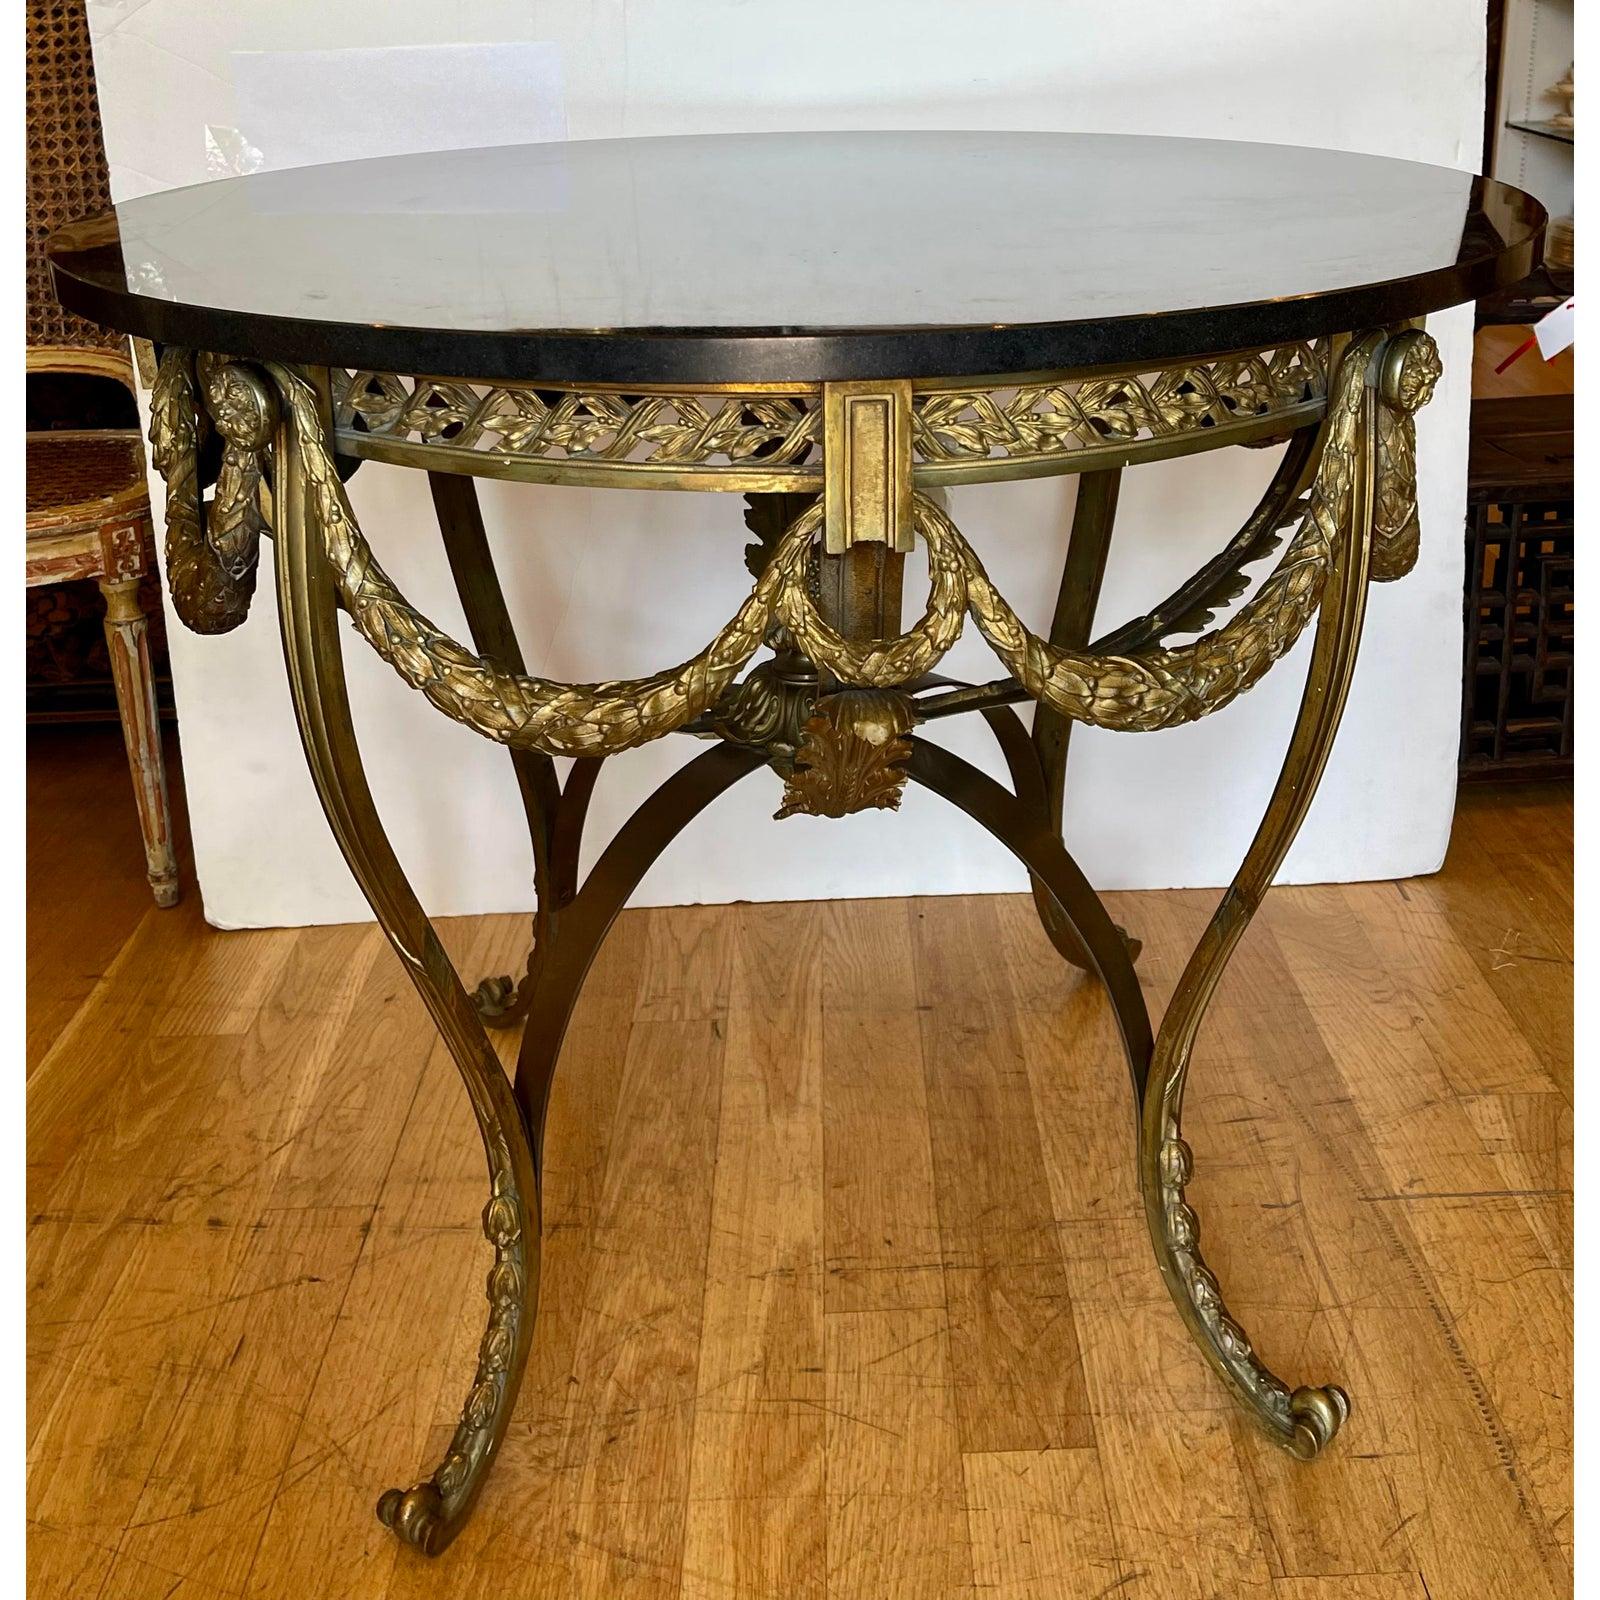 Antique French bronze Regency black marble top table.